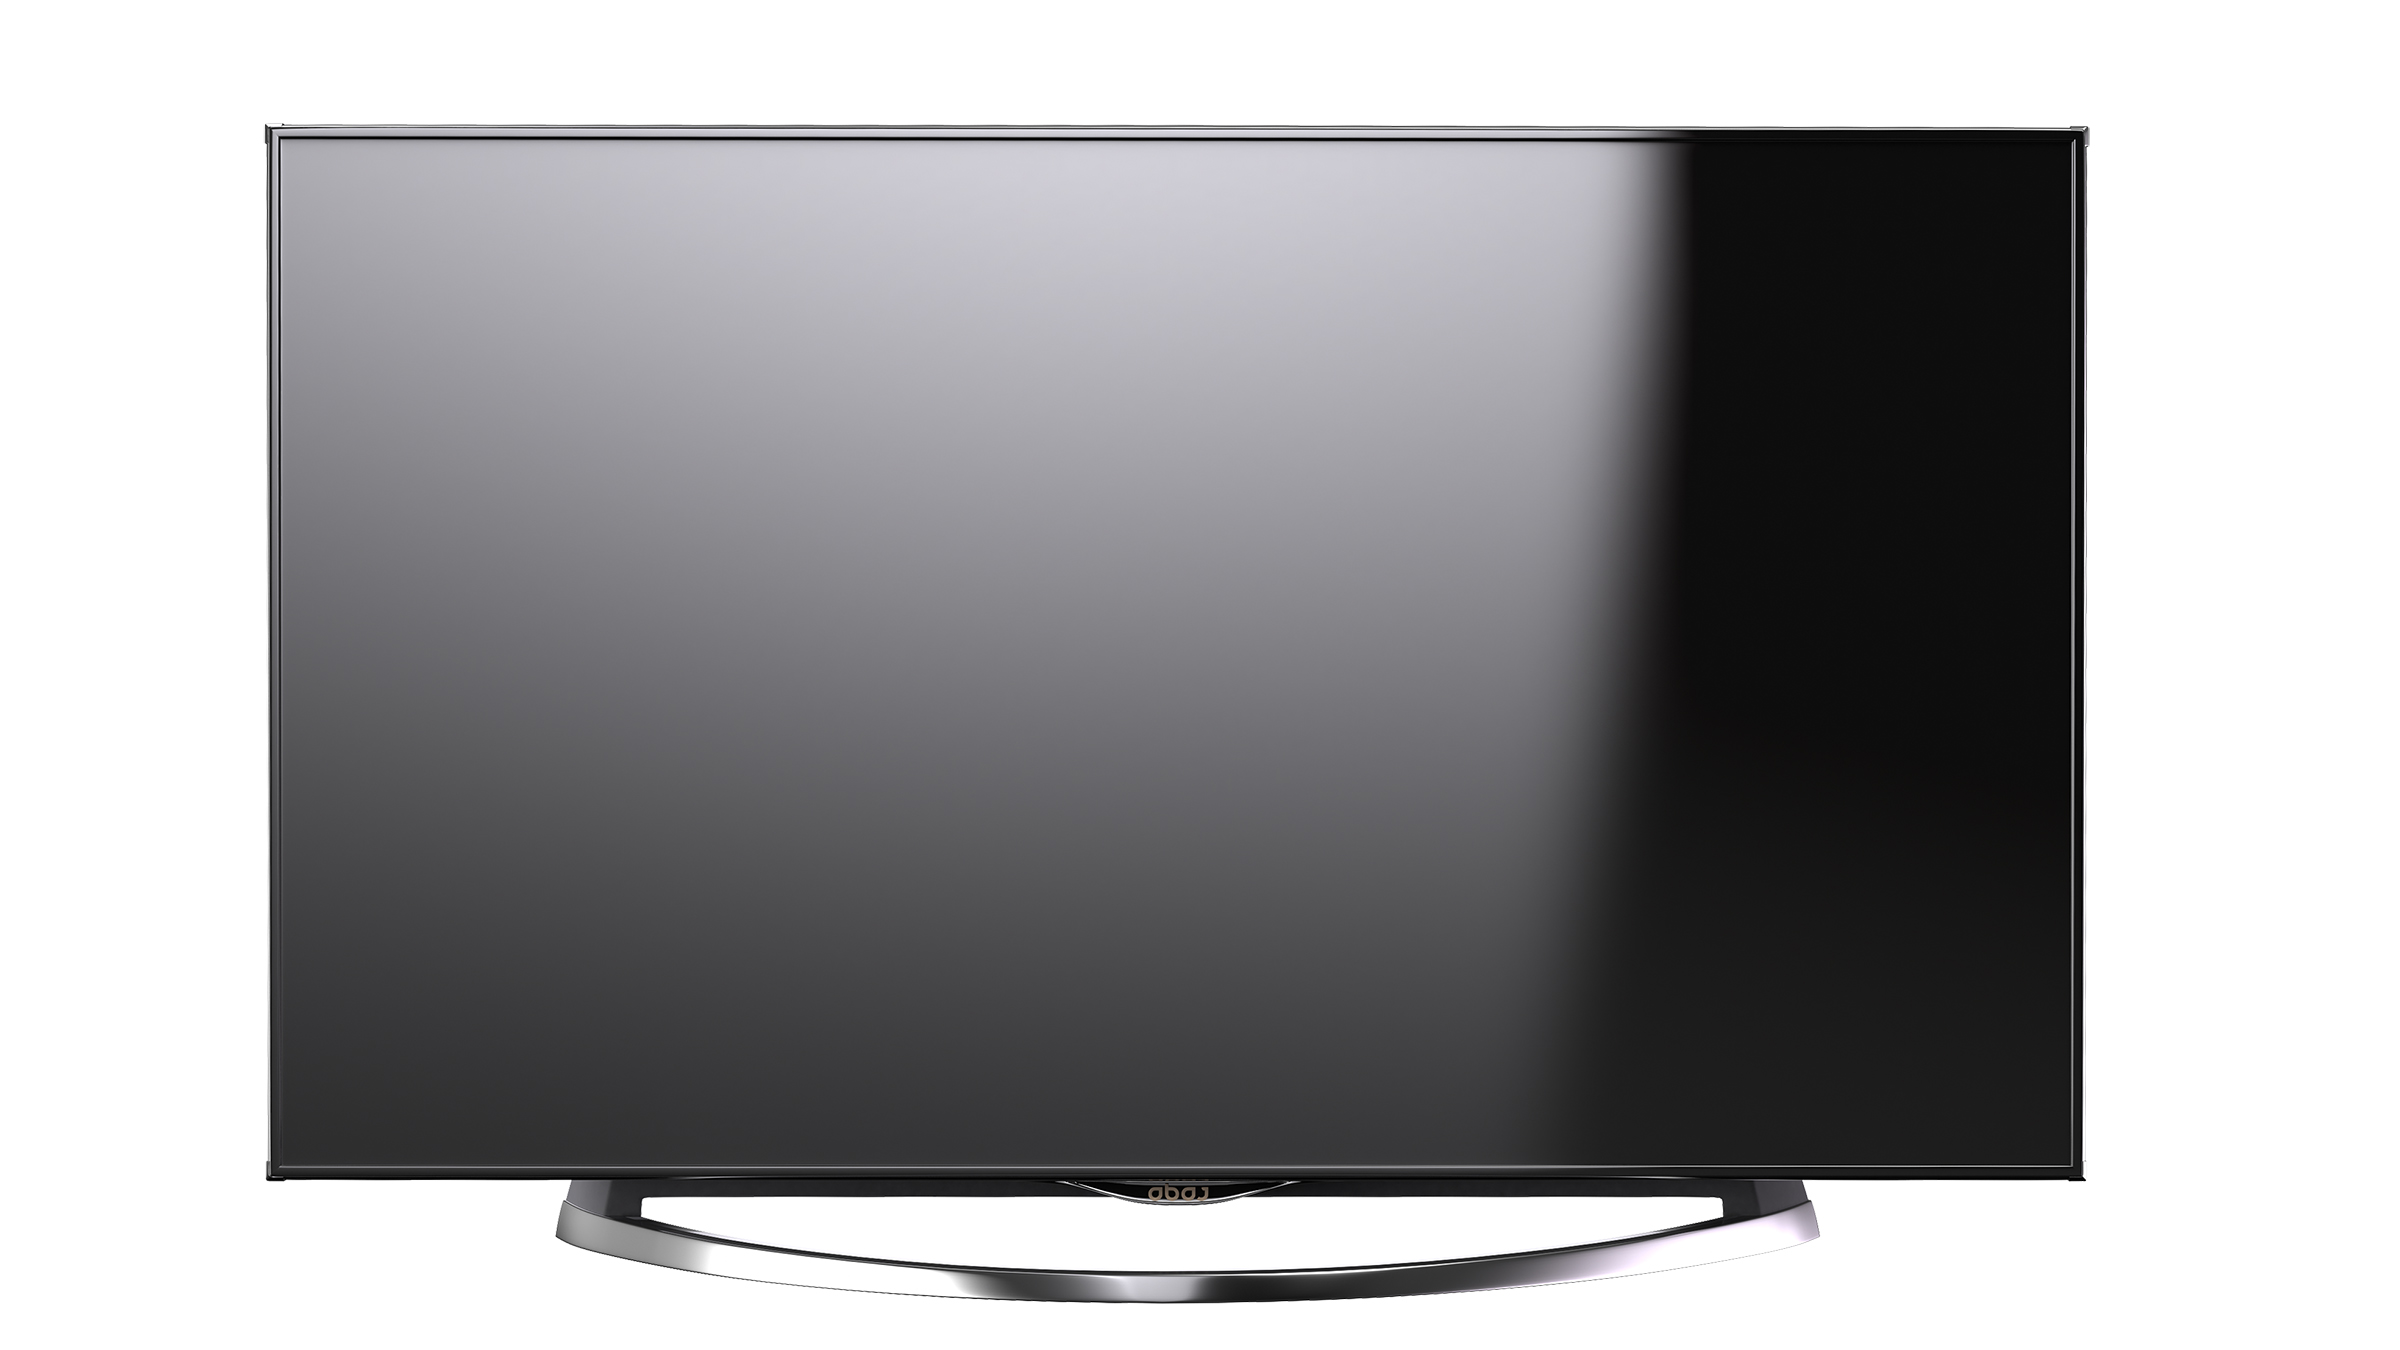 Product Modeling – TV